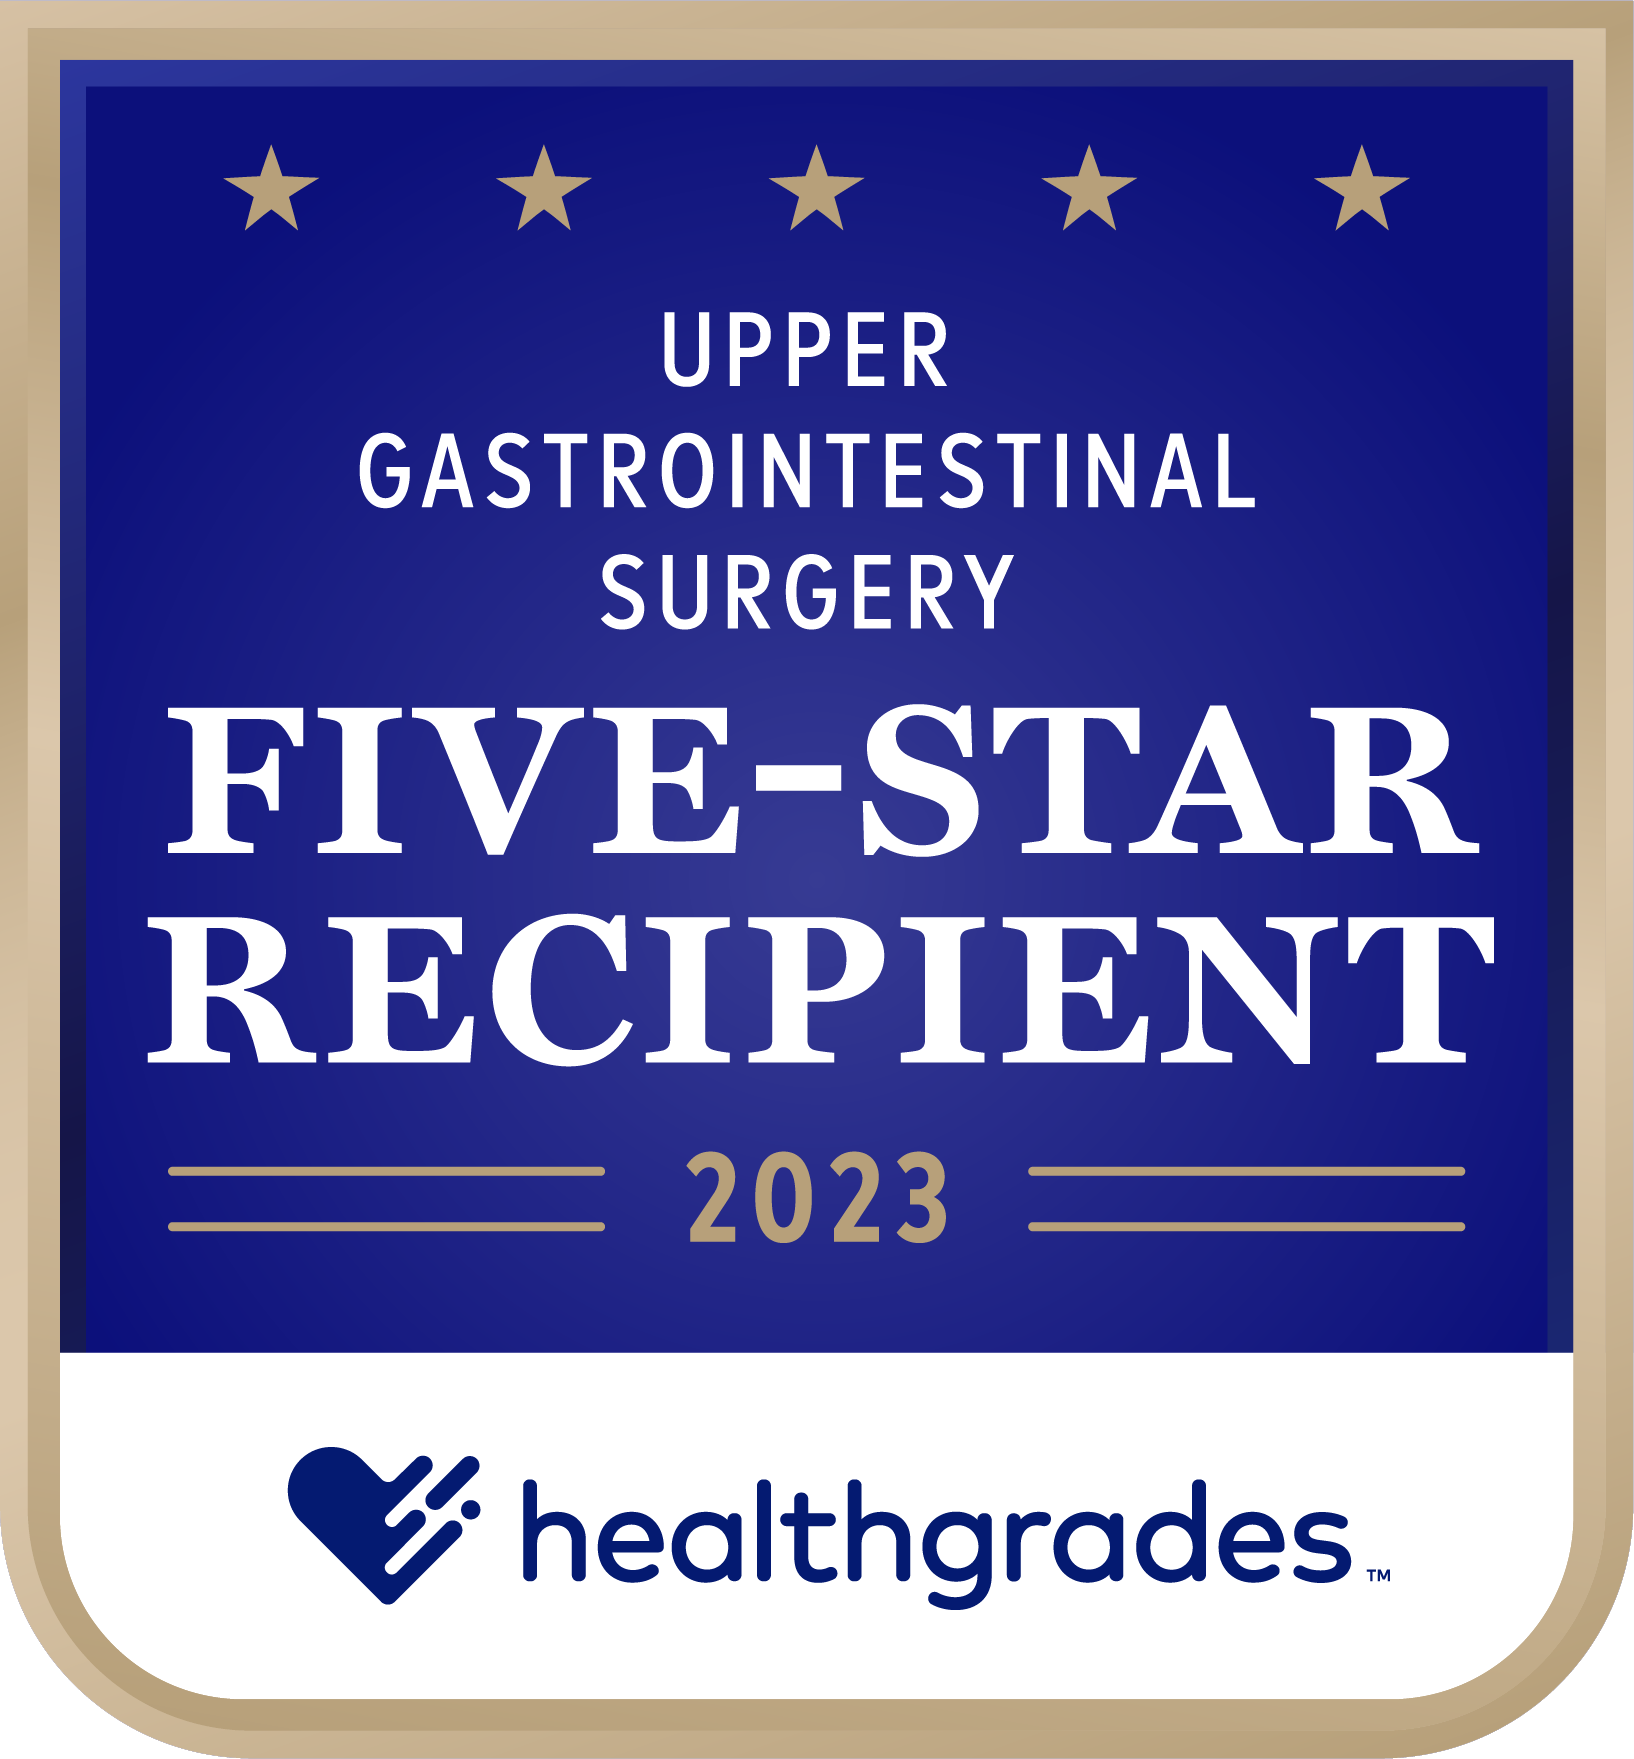 Surgical Care Upper Gastrointestinal Surgery Five-Star Award Healthgrades